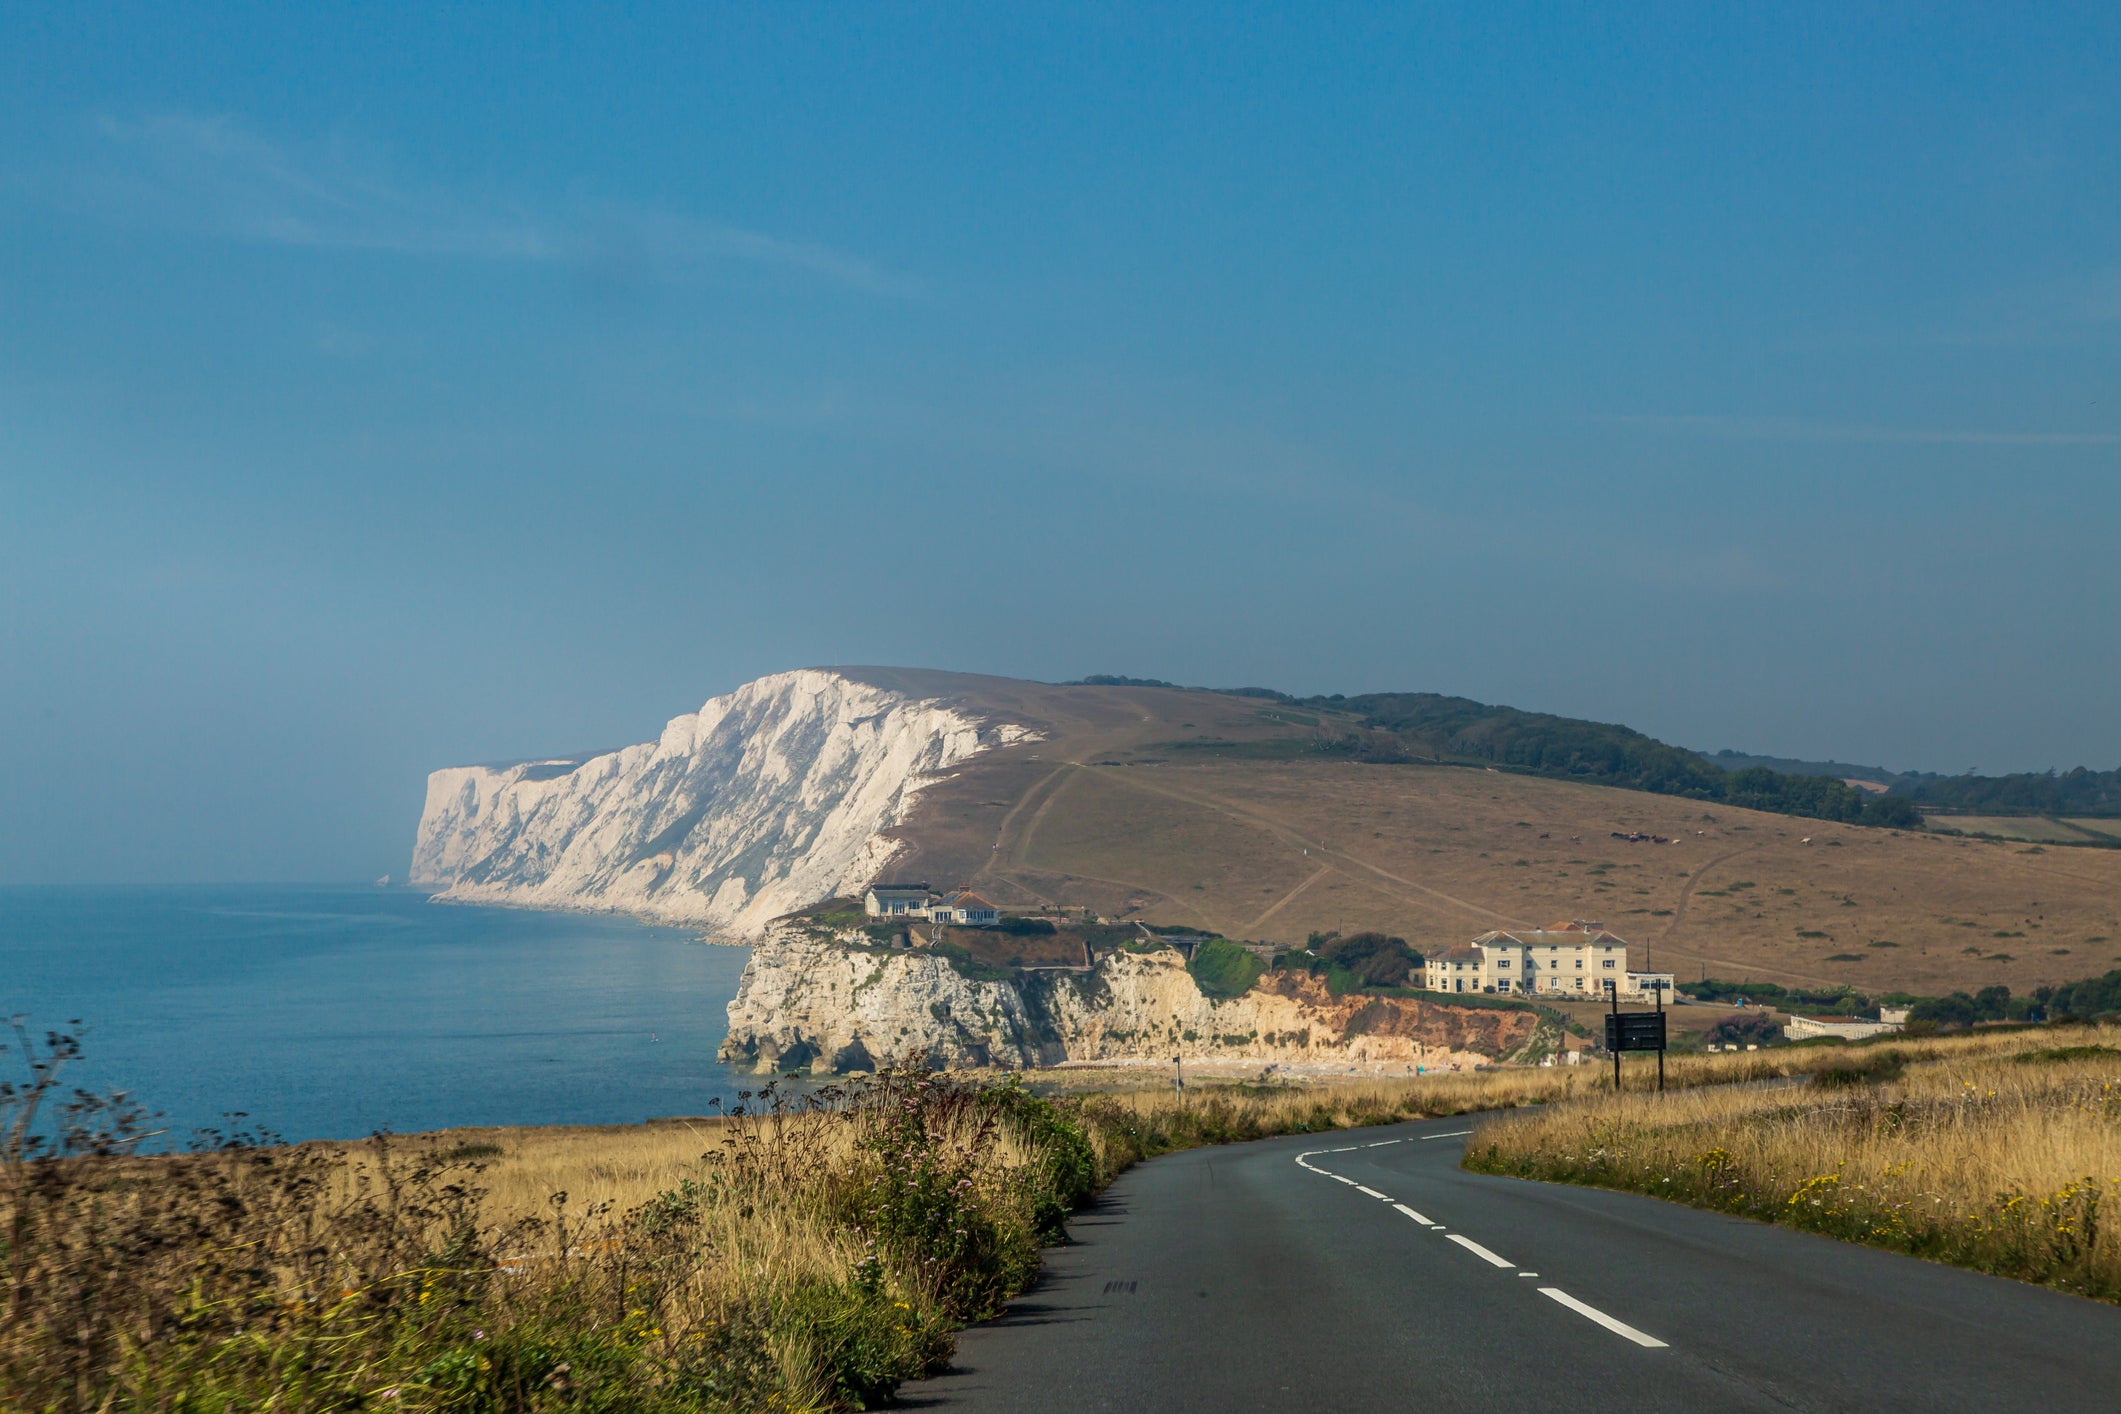 It’s a 14-mile walk from Carisbrooke to Alum Bay on the Tennyson Trail